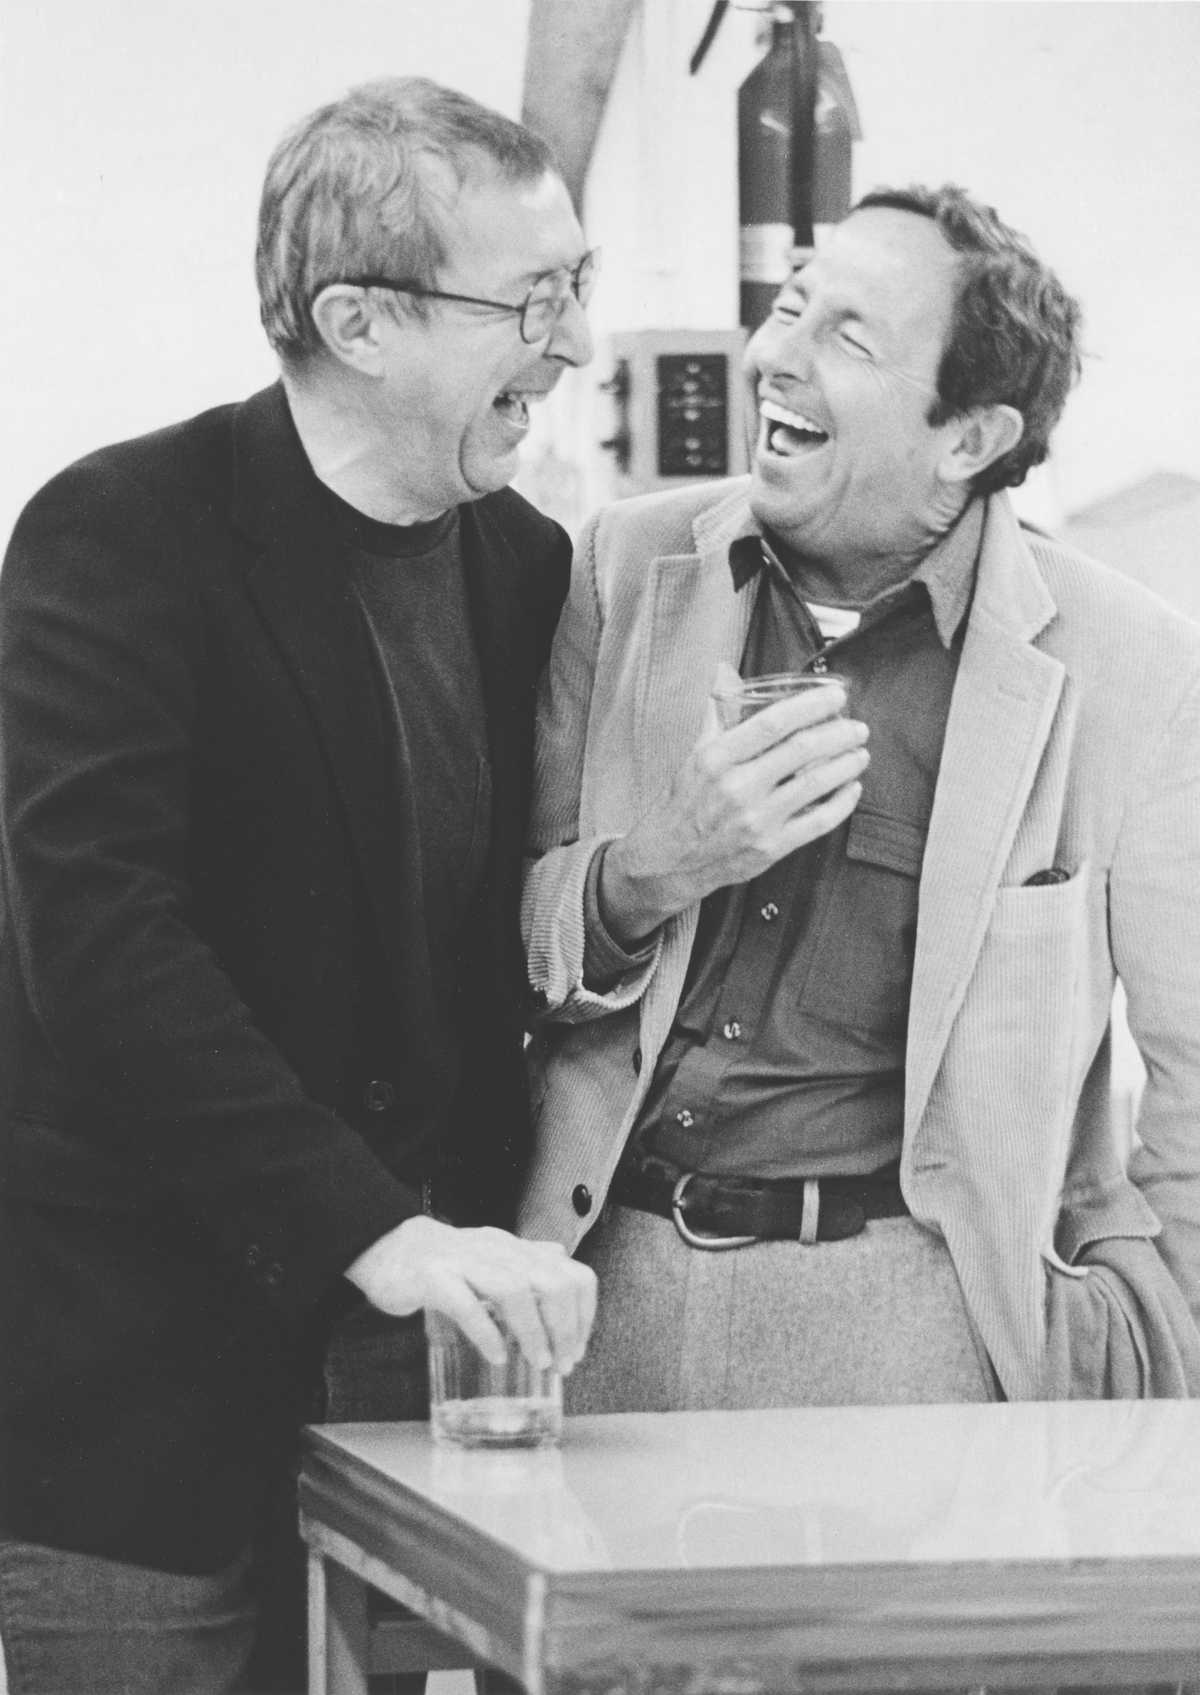 Two men standing close to each other and laughing together